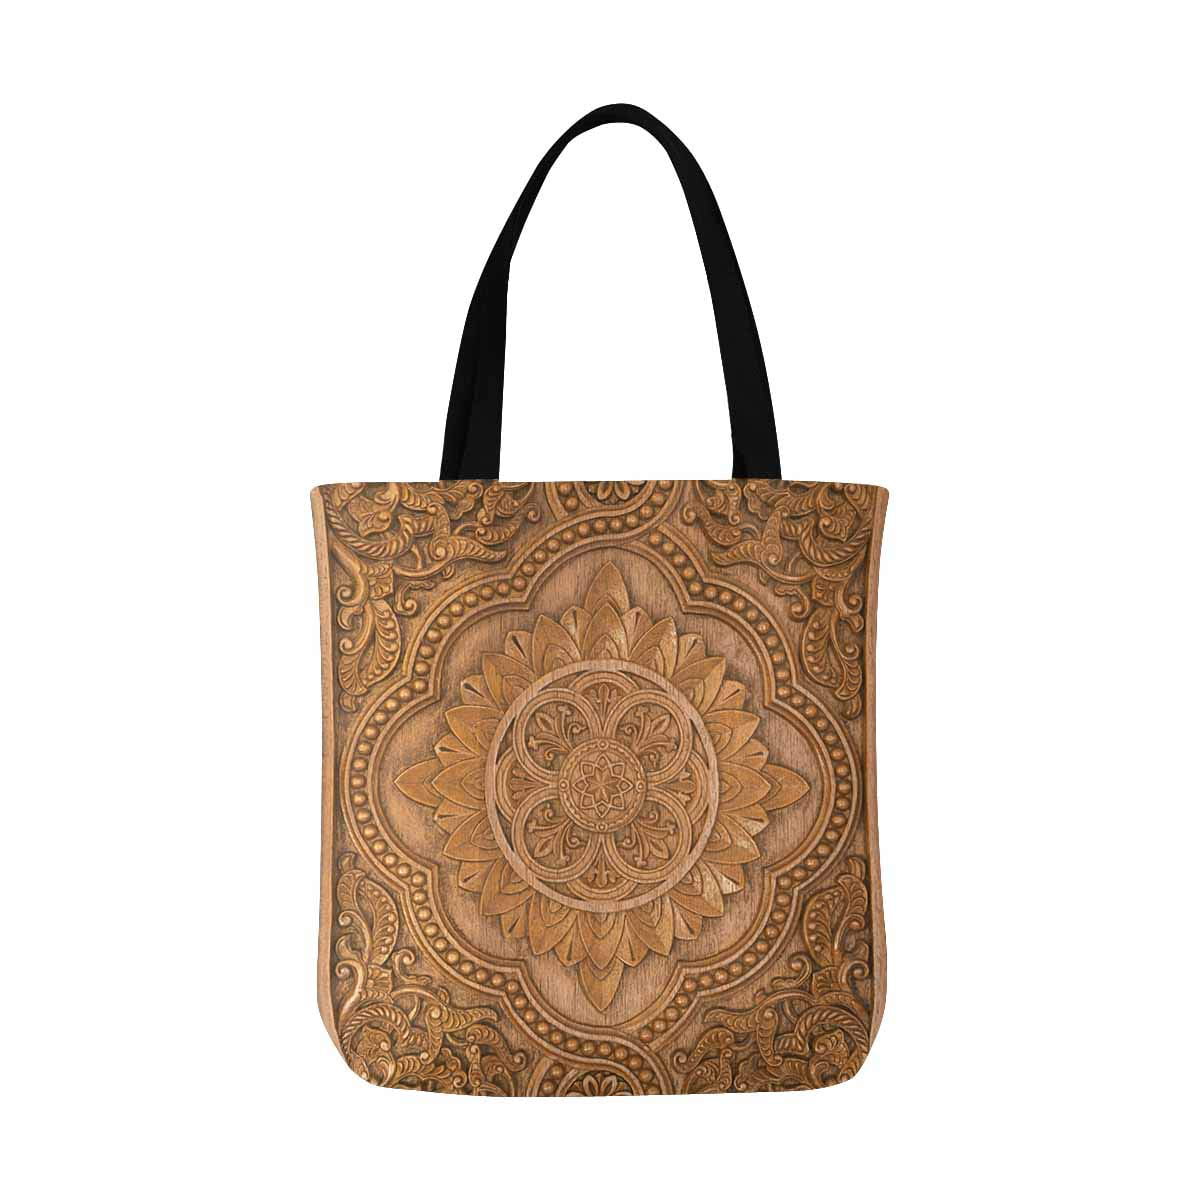 ASHLEIGH Retro Mandala Style Floral Circle Wood Carving Art Canvas Reusable  Tote Bag Durable Shopping Tote Bags Book Bags for Women Men Kids